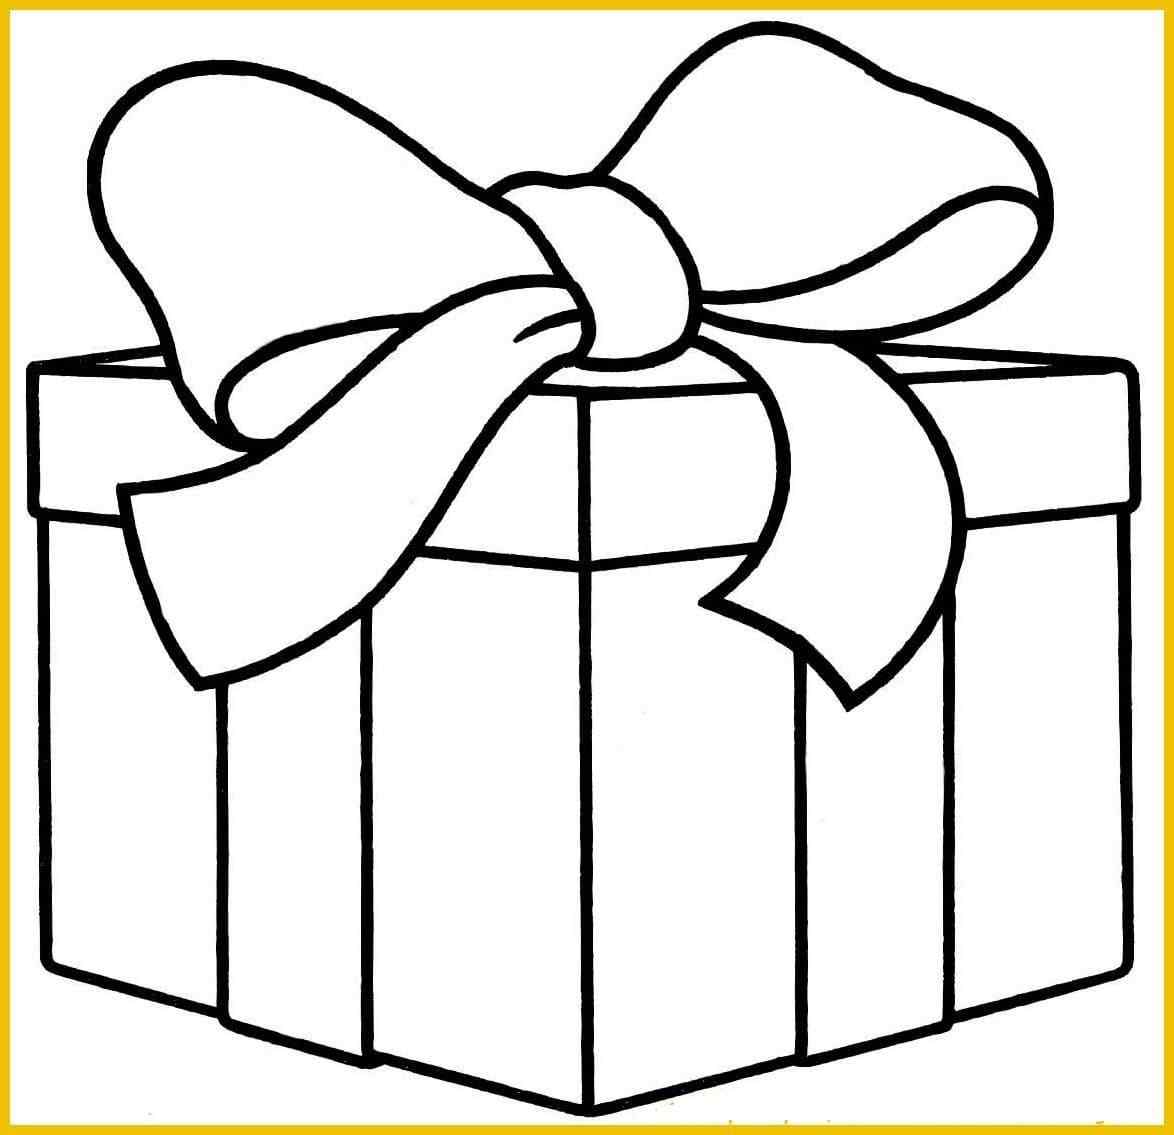 The Gift Box For Kids Coloring Page